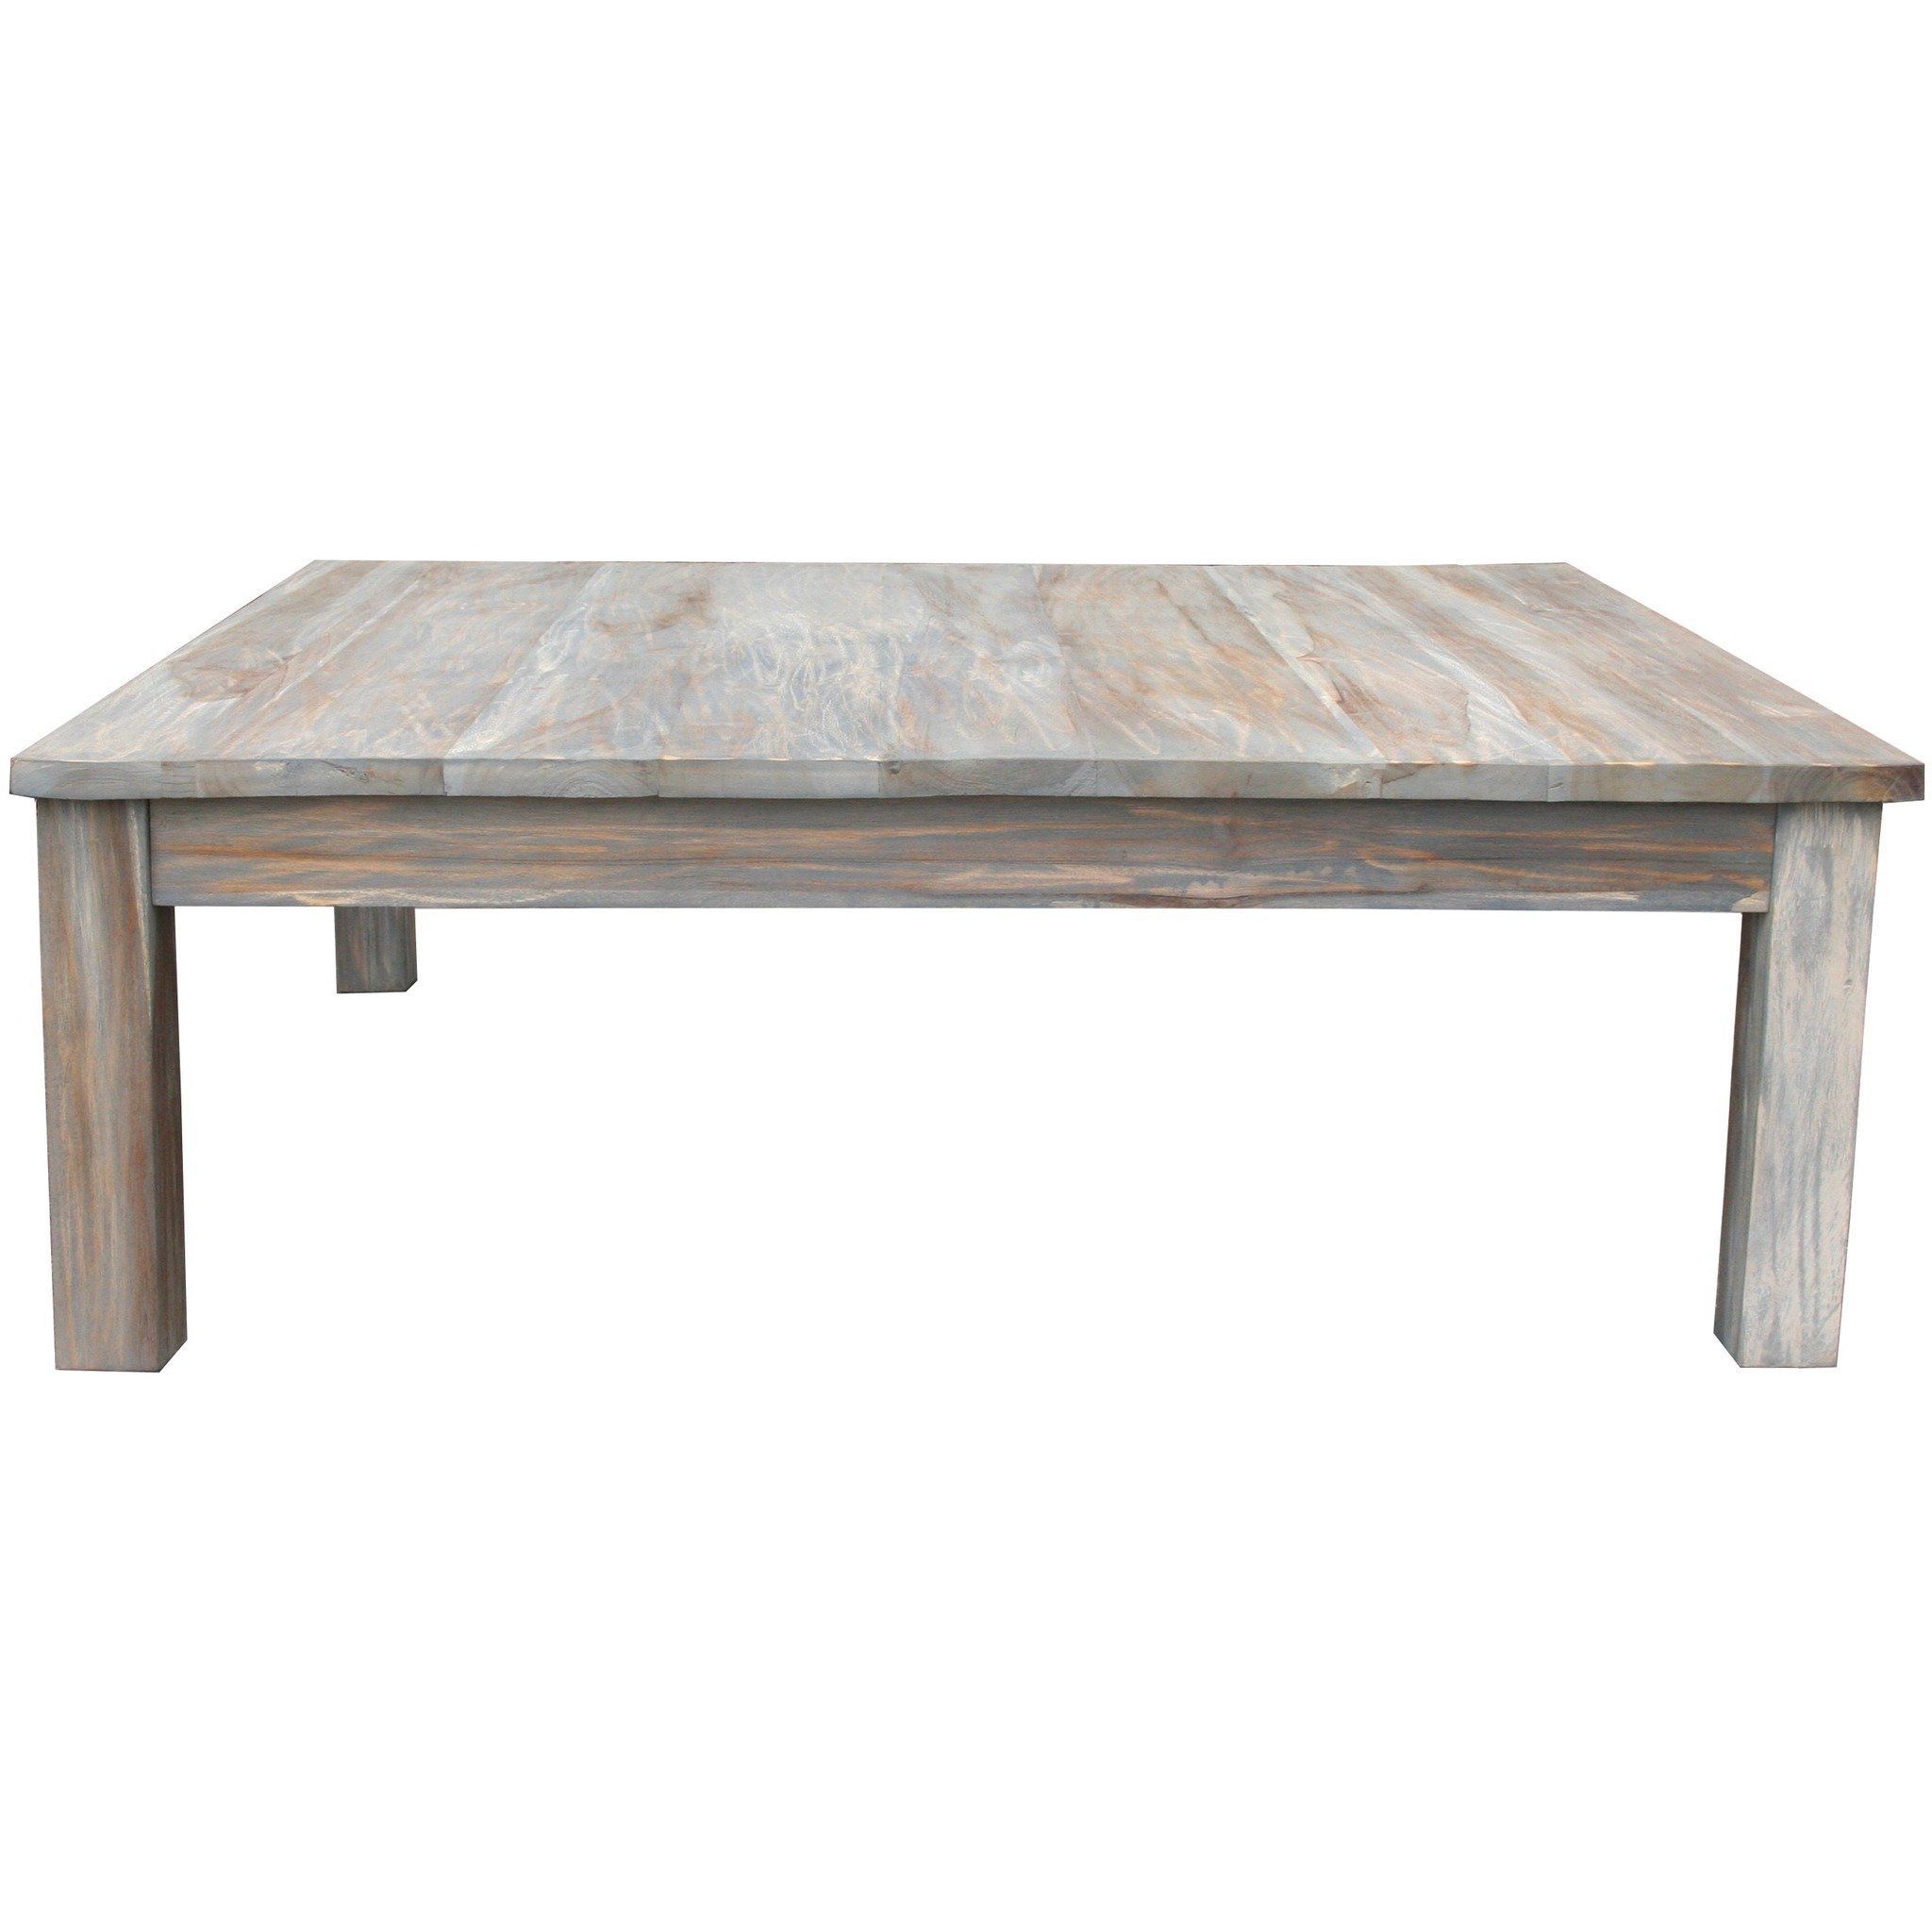 Widely Used Gray Driftwood Storage Coffee Tables Throughout Teak Wood Grey Wash Rustic Coffee Table  (View 5 of 20)